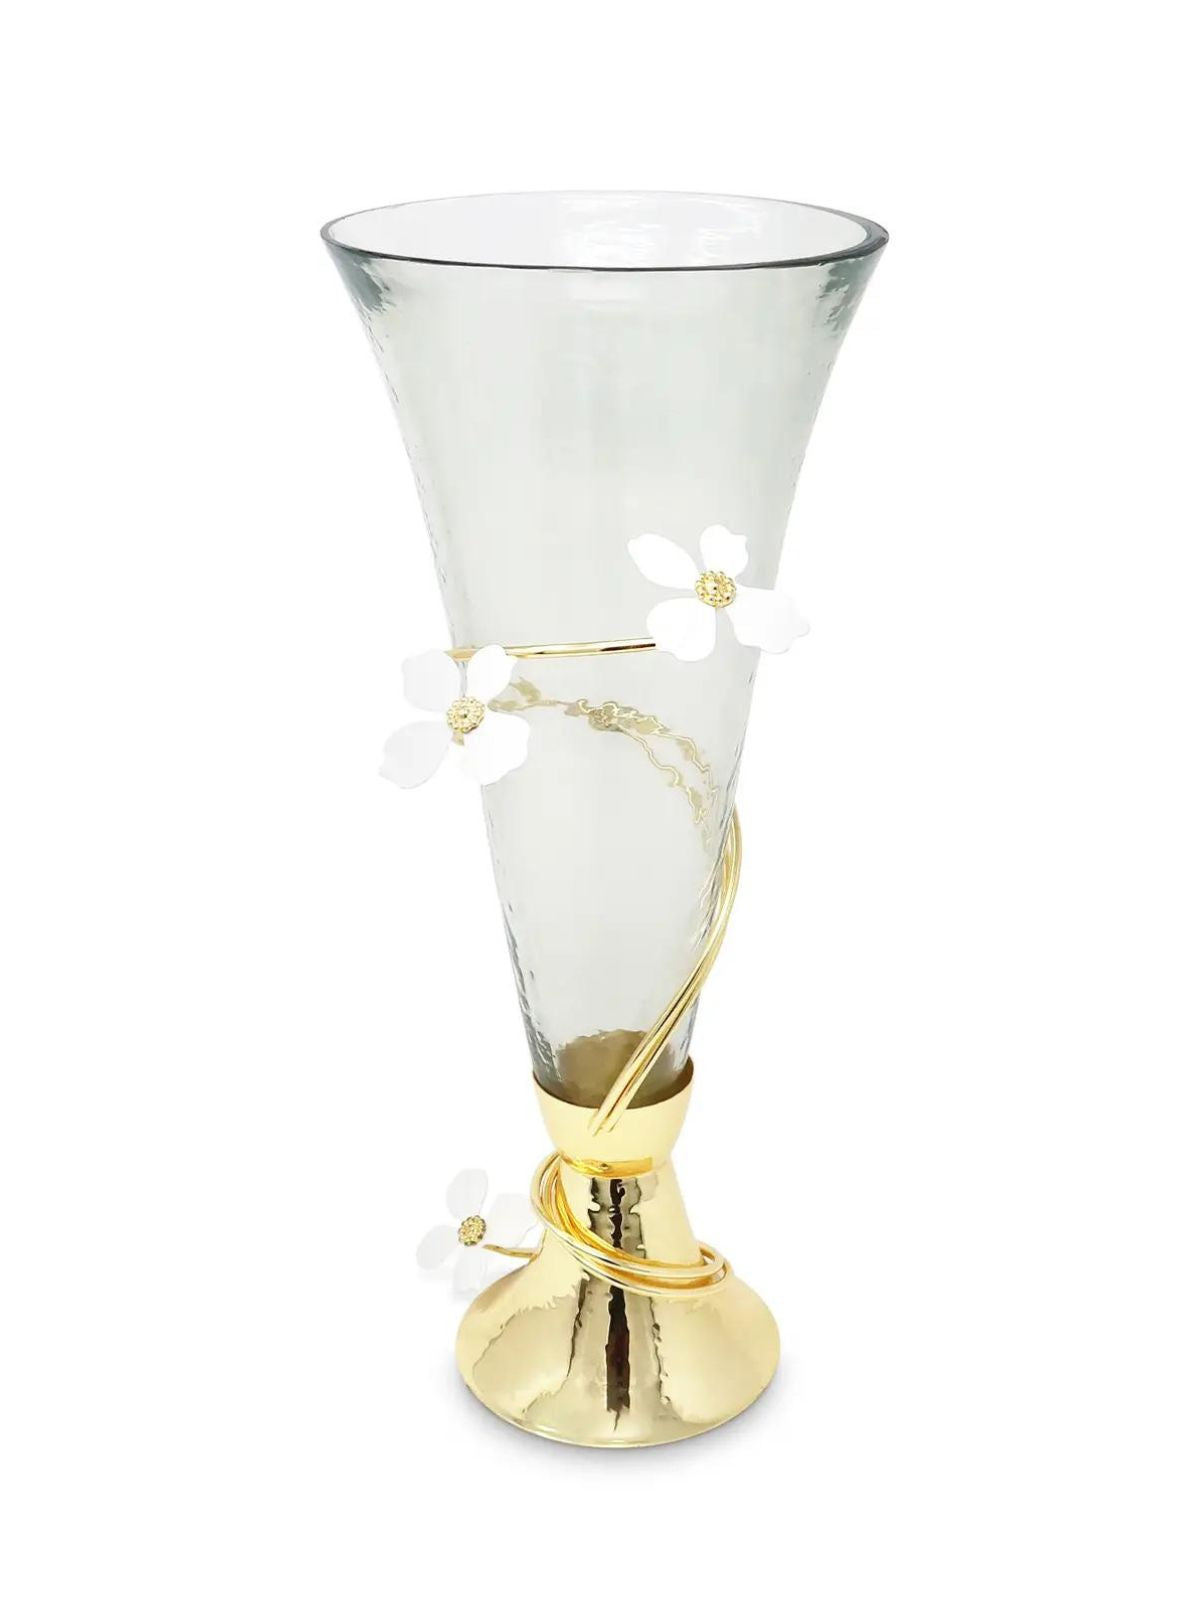 Stunning Glass Vase with Elegant Gold Twirl Design and Delicate White Jewel Flowers - Luxurious Home Goods.